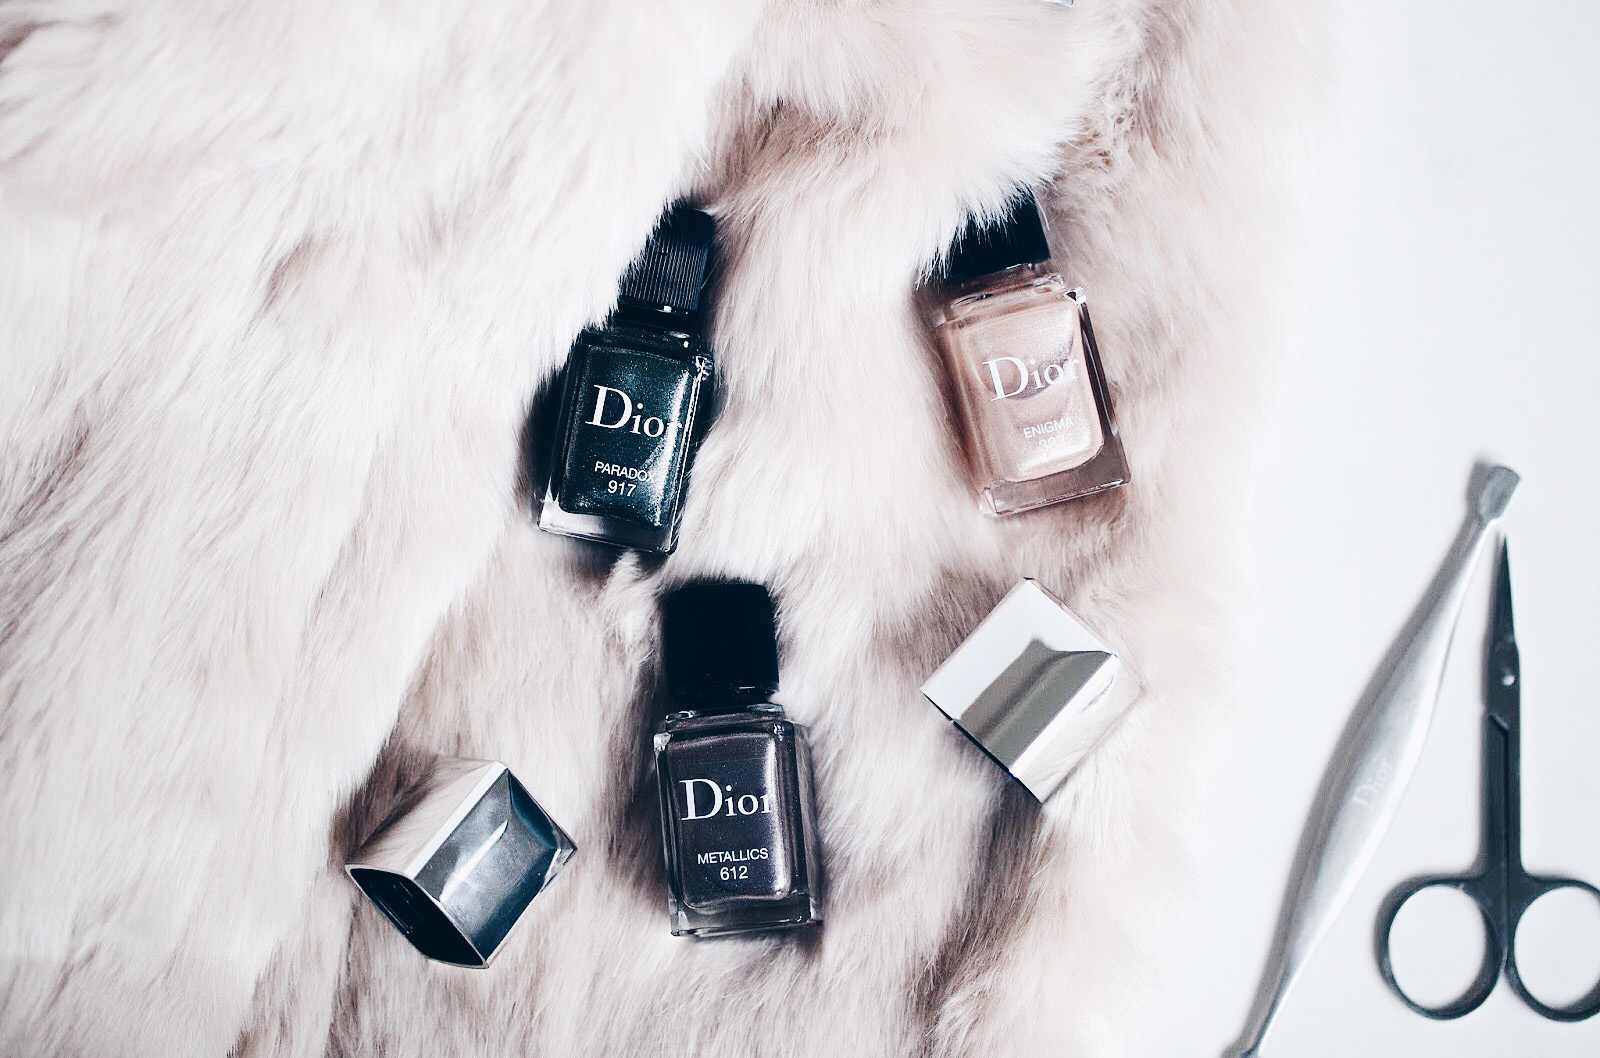 dior vernis enigma paradox metallics avis test swatches collection automne fall 2017